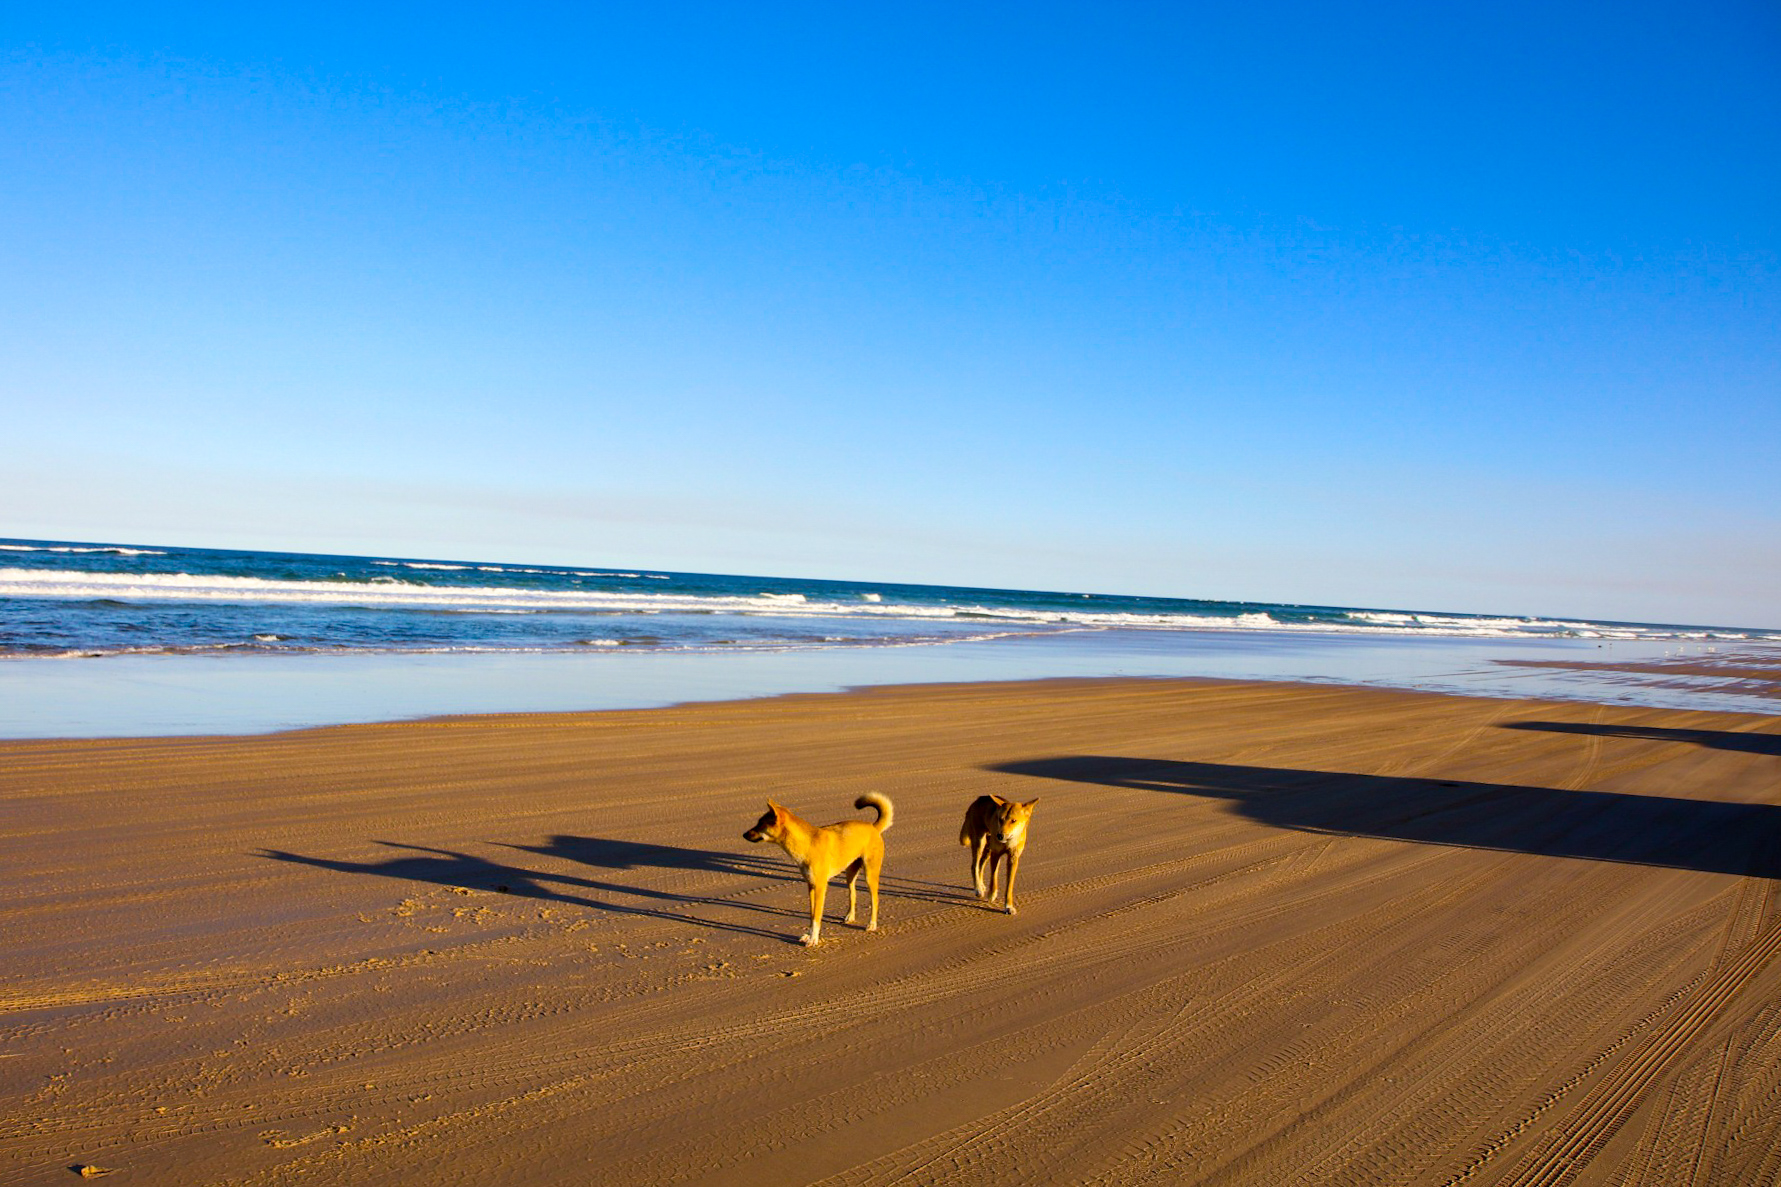 Wild dingos on Fraser island. Watching them from a safety of a car.